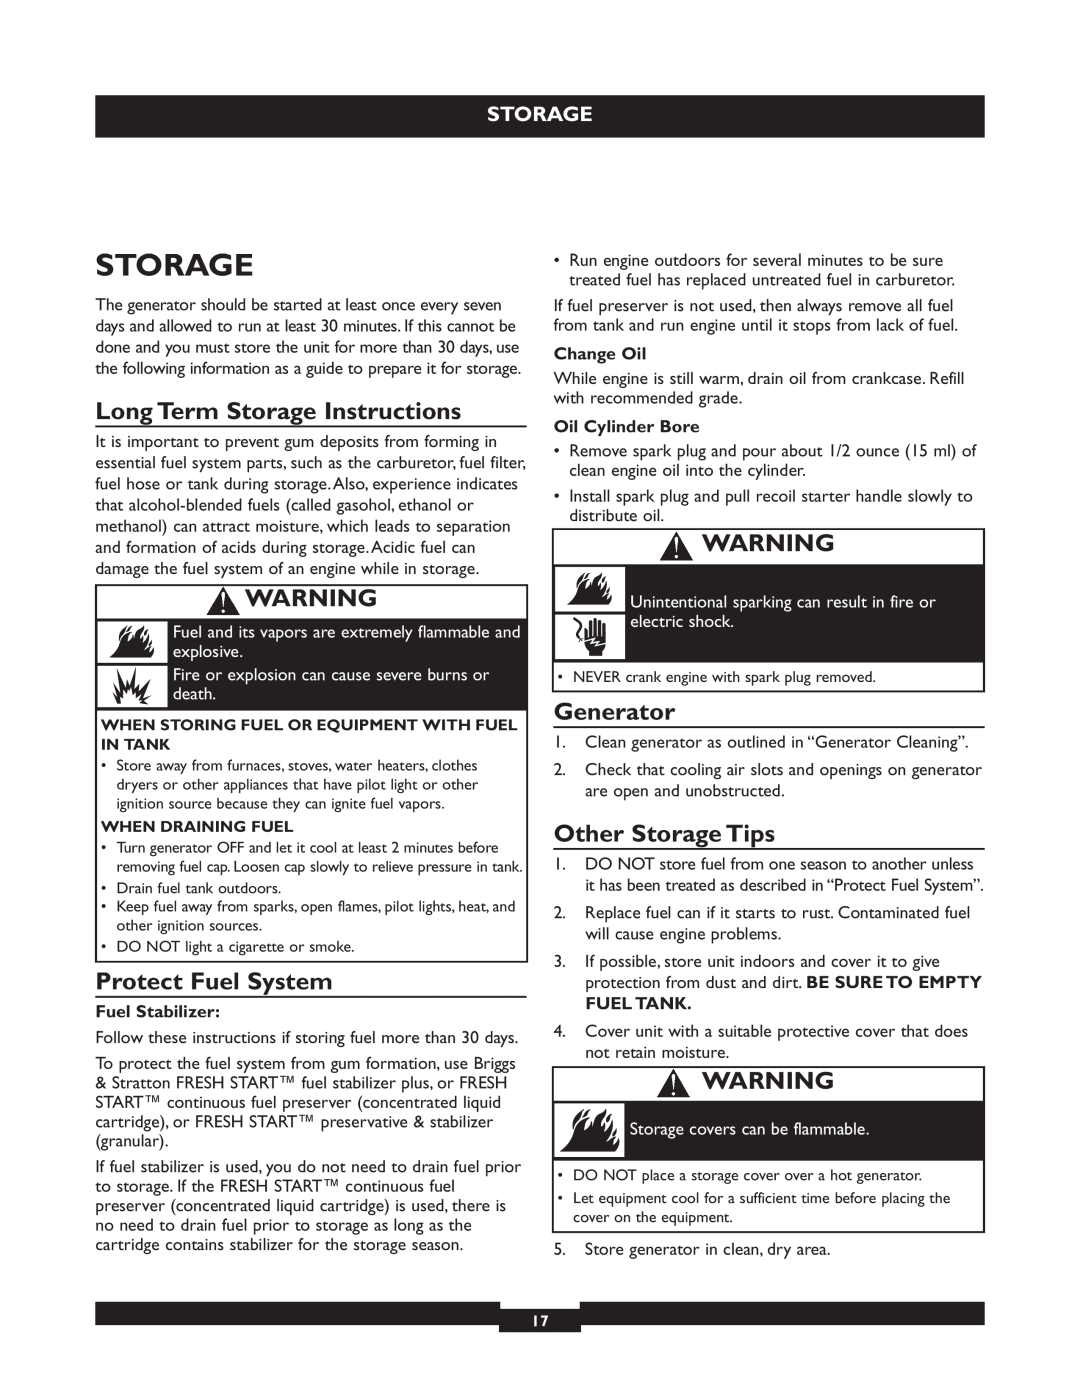 Briggs & Stratton 30219 manual Long Term Storage Instructions, Protect Fuel System, Generator, Other Storage Tips 